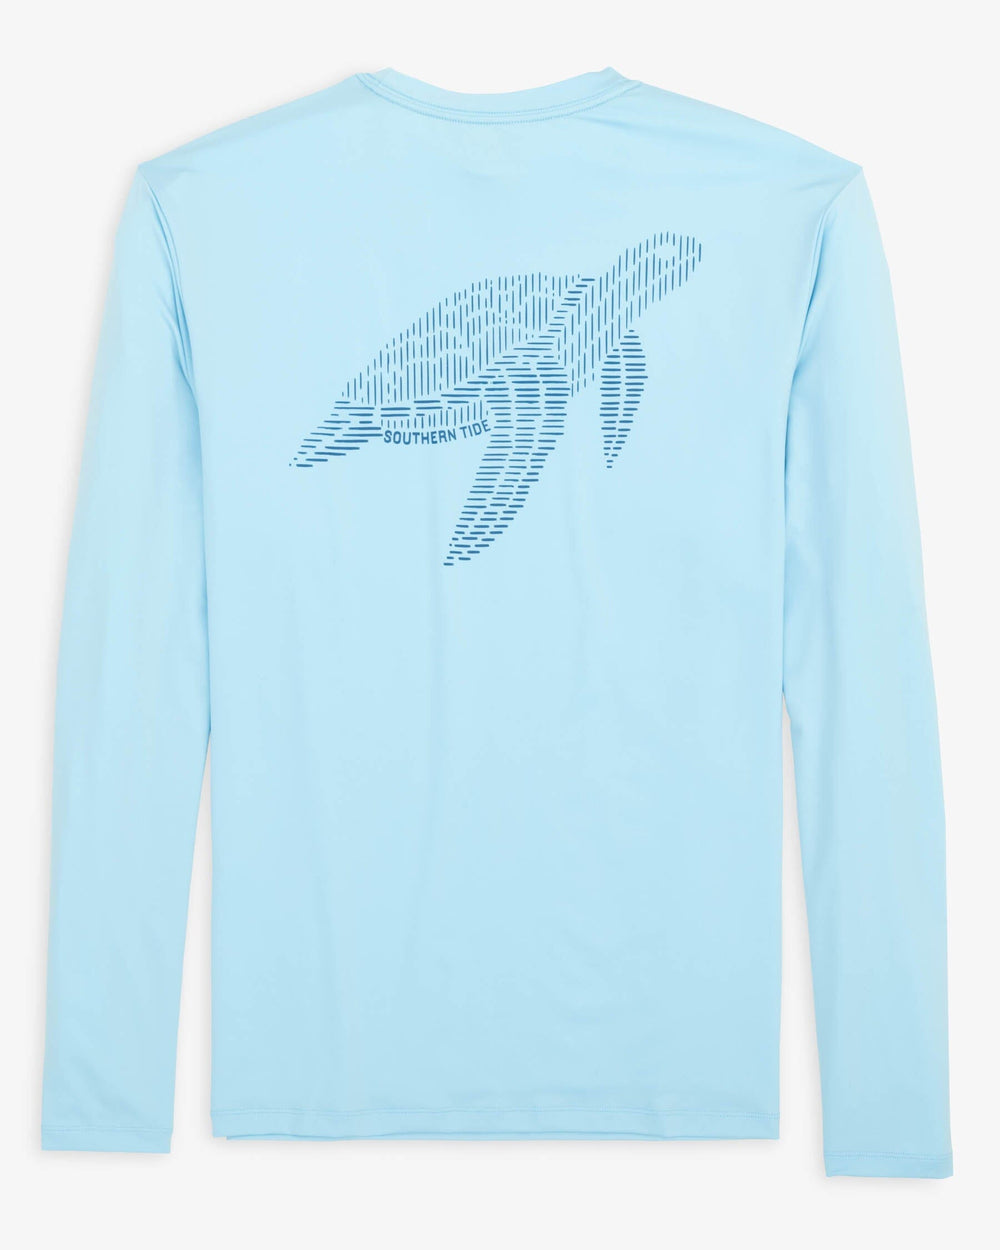 Lined Turtle Long Sleeve Performance T-Shirt | Southern Tide